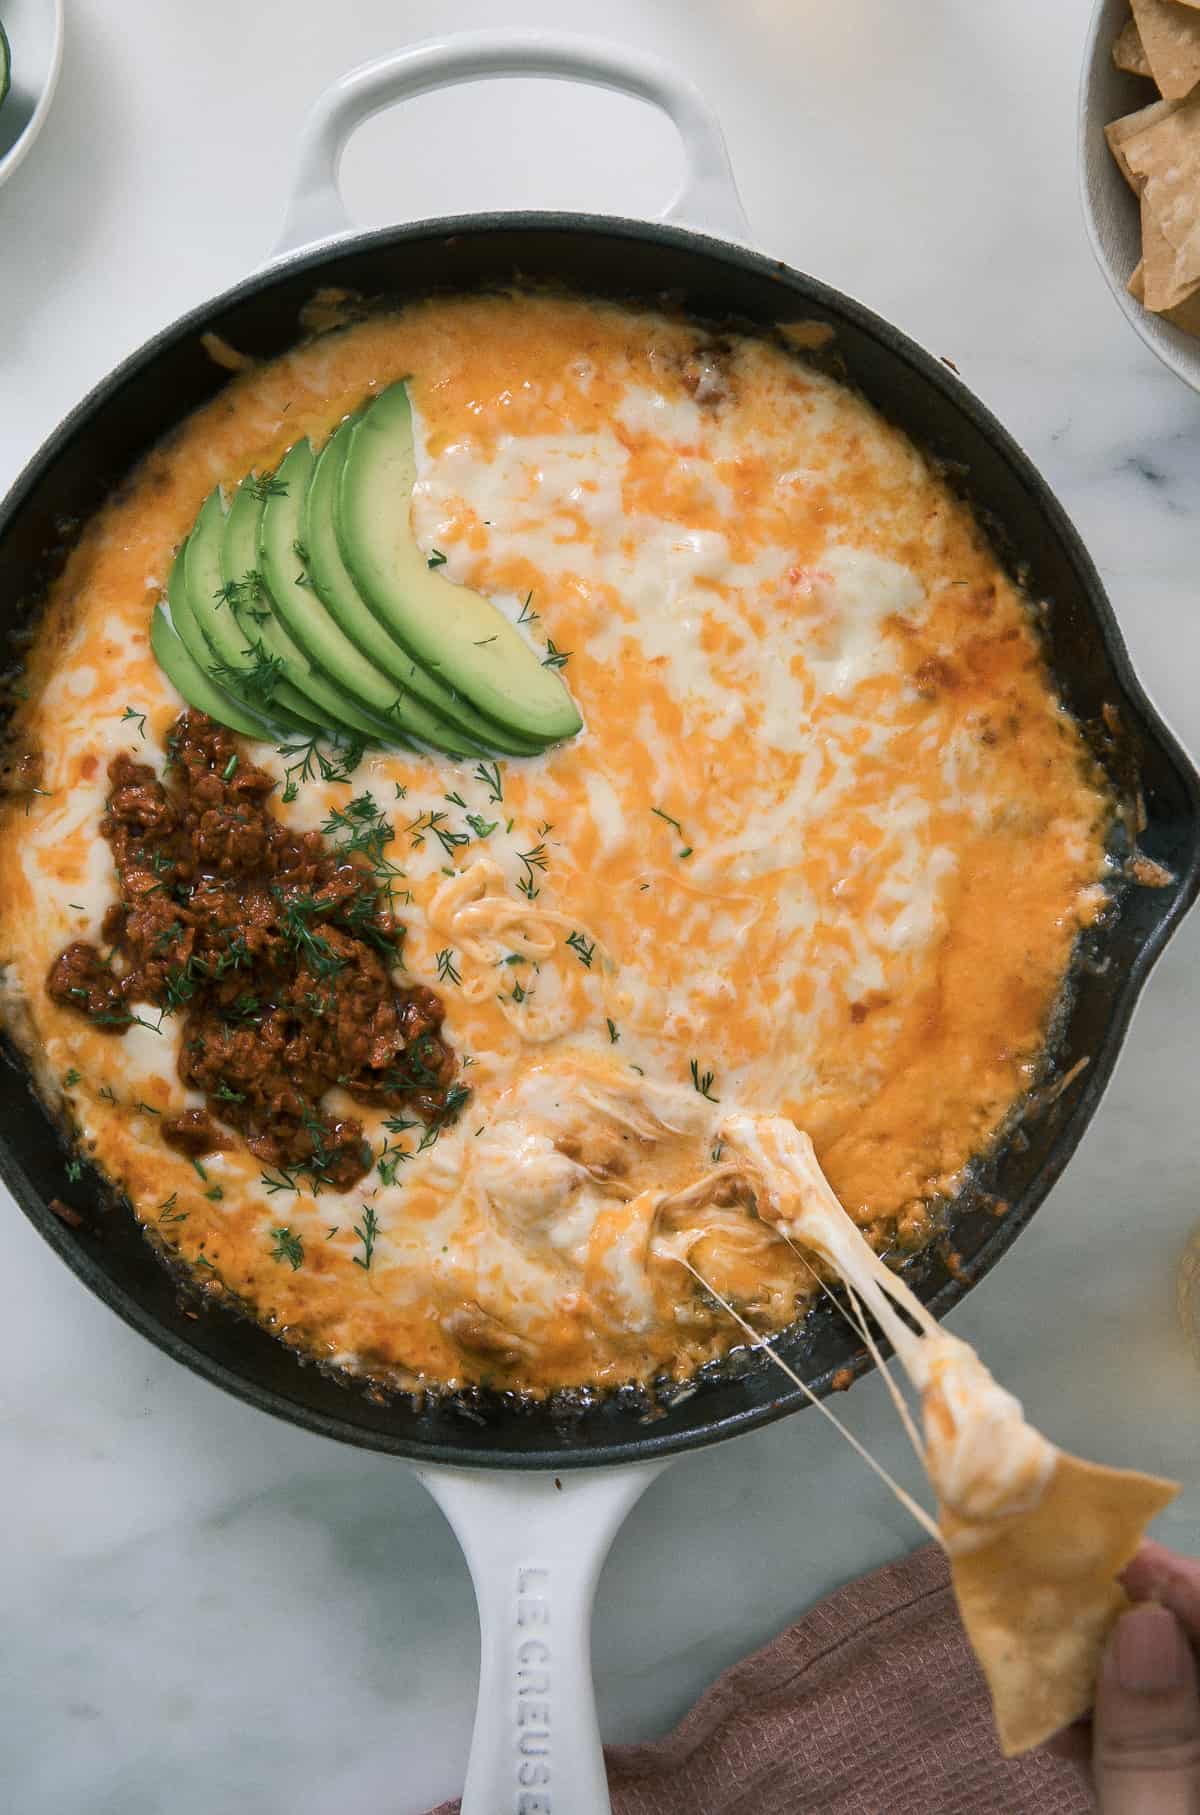 Skillet of queso fundido topped with chorizo and avocado.